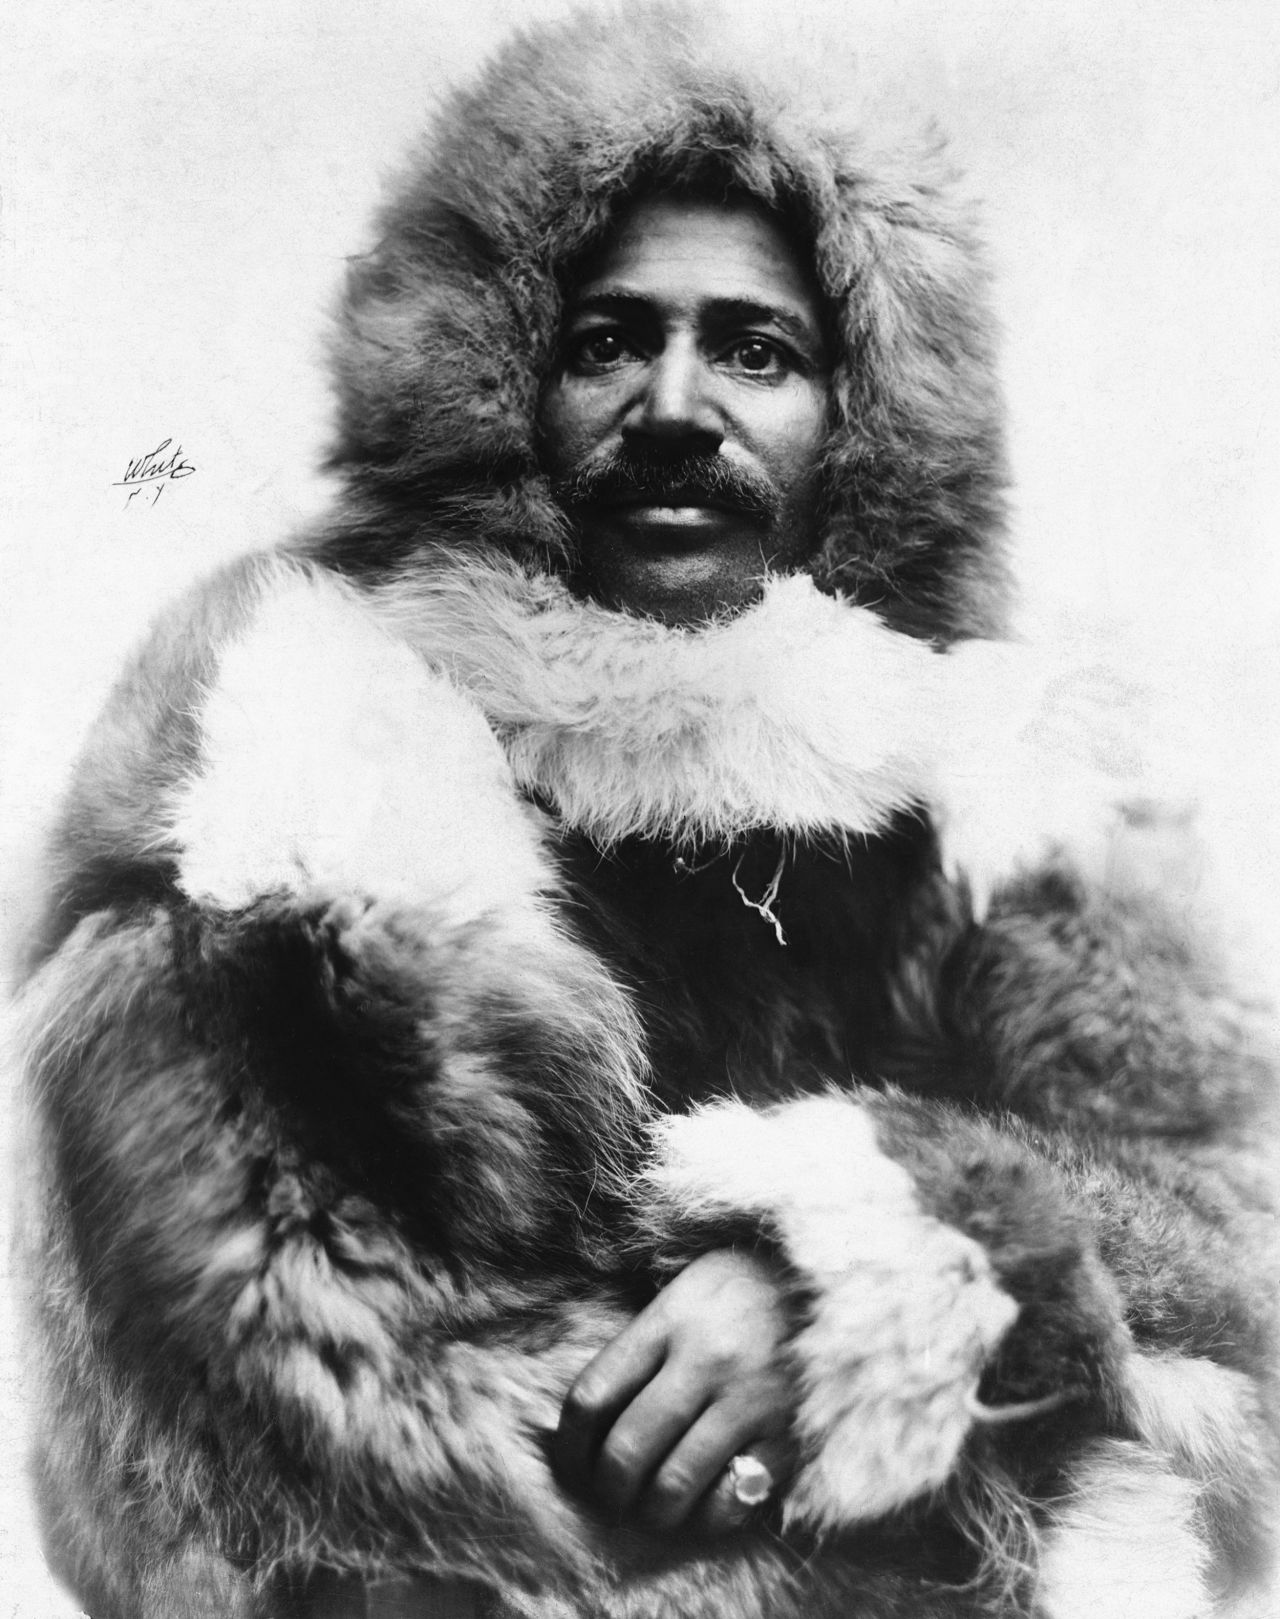 African American explorer Matthew A. Henson (1866-1955) reached the Arctic on seven expeditions with Robert Peary from the 1890s until their final expedition in 1908-1909, when they reached the North Pole. Henson was the first African American to explore the Arctic regions.